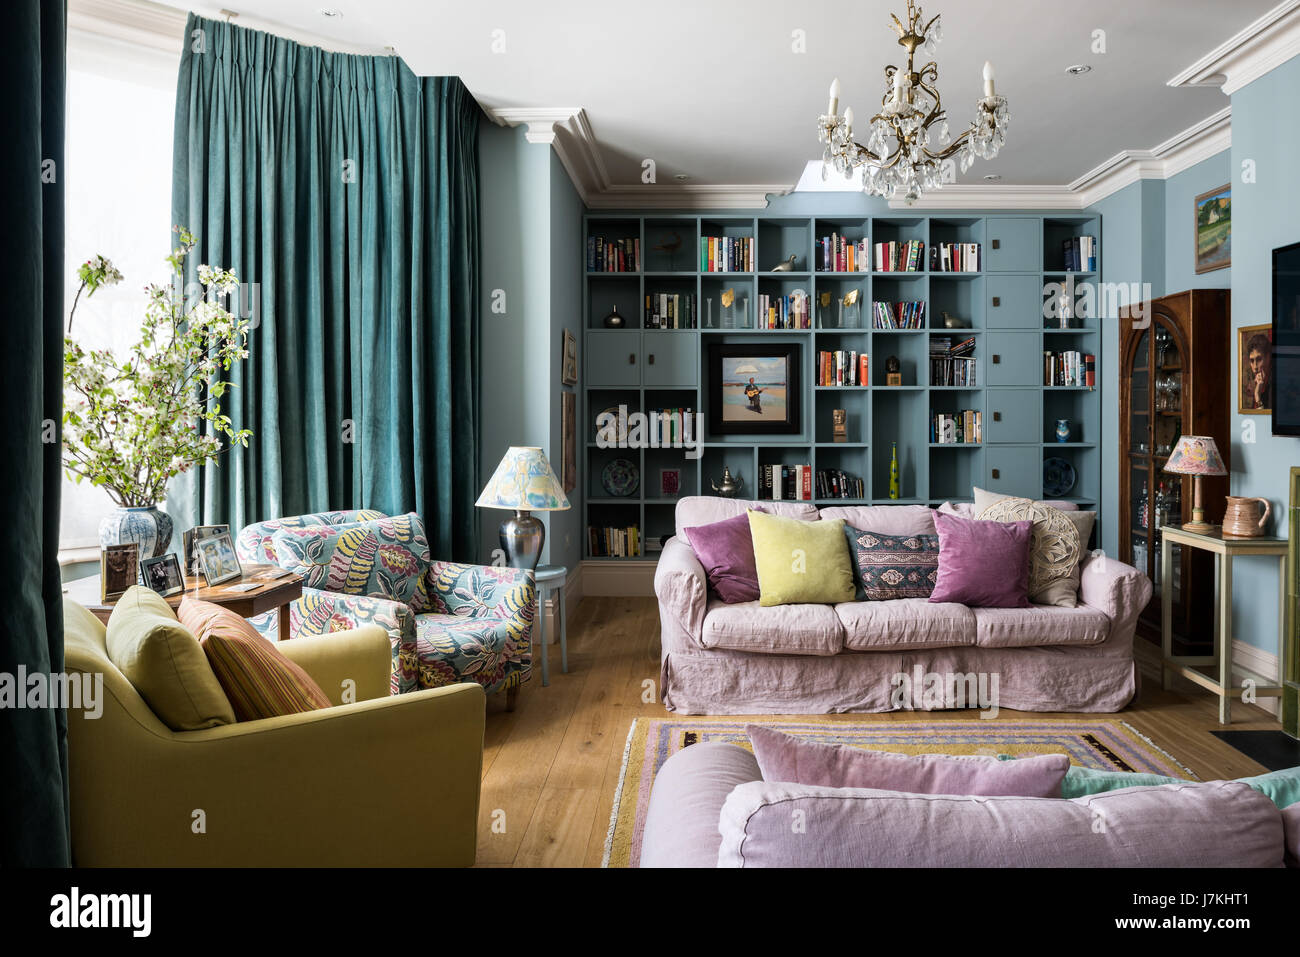 Colourful sitting room with dusty pink upholstered sofas and assorted cushion fabrics. The floor-length curtains are a shade of teal Stock Photo